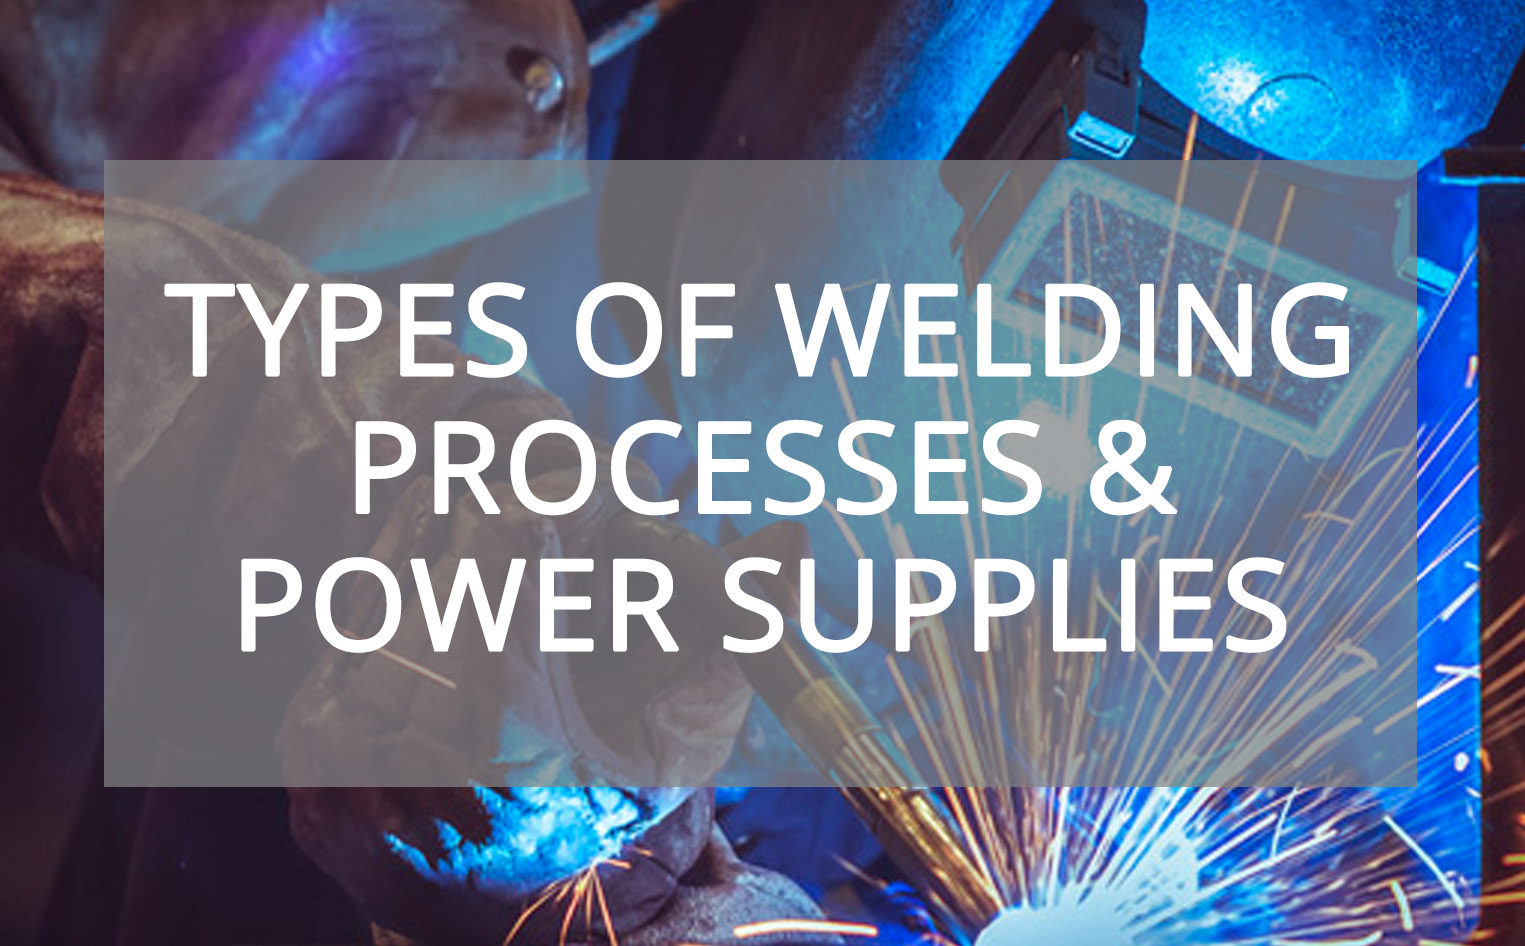 Types of Welding Process and Power Supplies